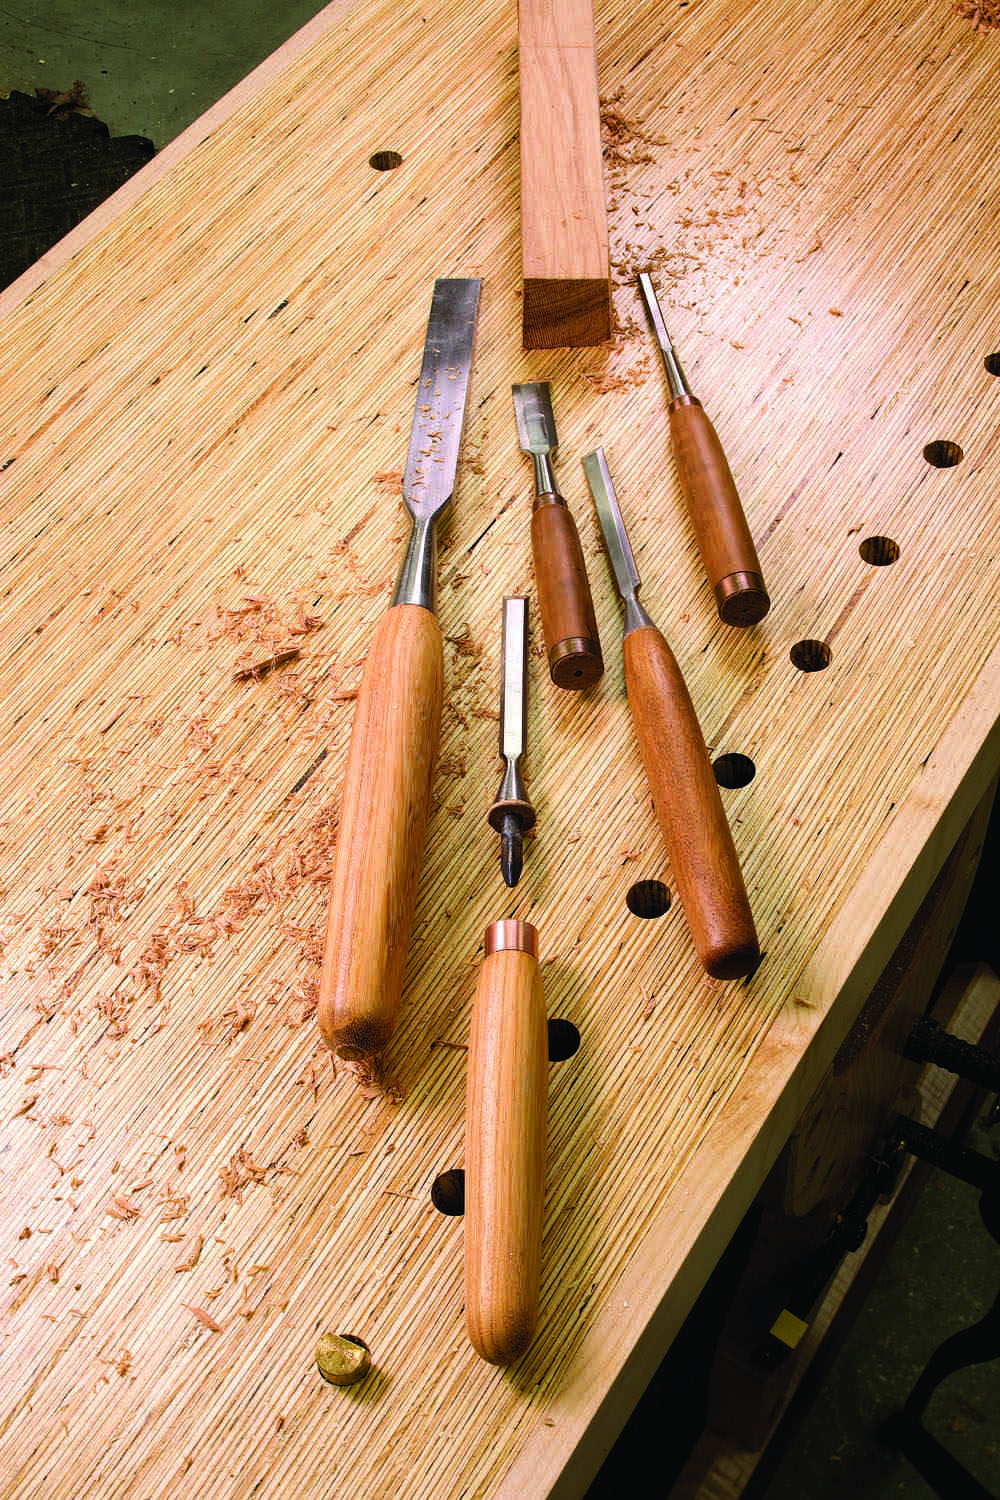 A Brief Look At The World Of Woodworking Chisels 